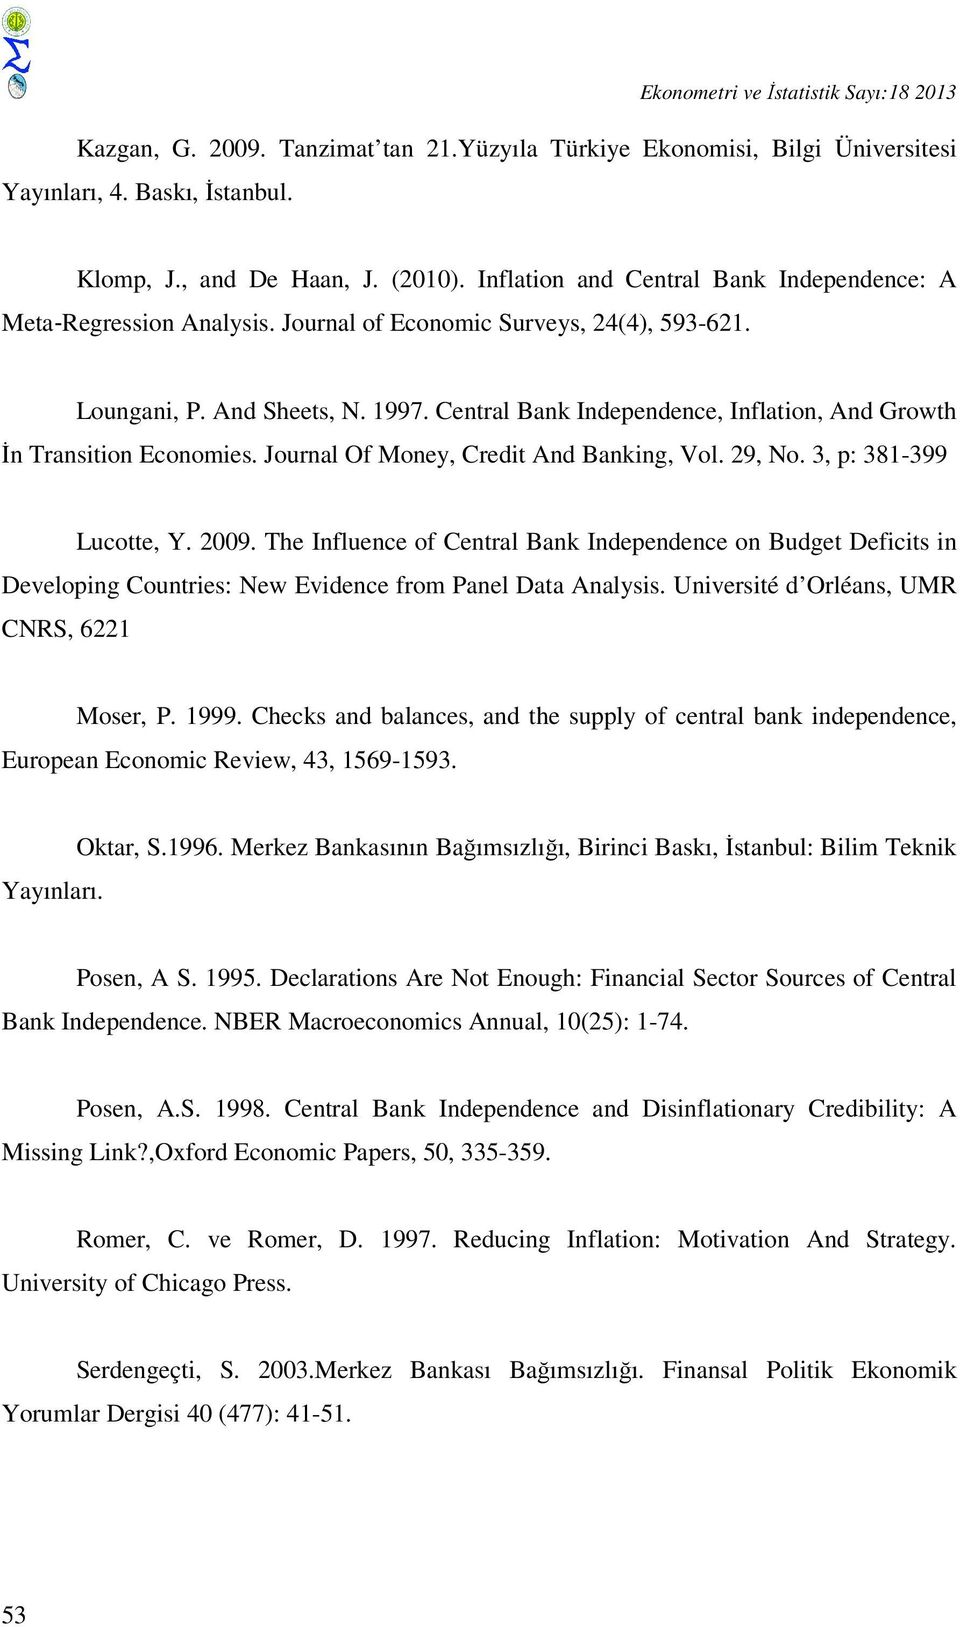 Central Bank Independence, Inflation, And Growth İn Transition Economies. Journal Of Money, Credit And Banking, Vol. 29, No. 3, p: 381-399 Lucotte, Y. 2009.